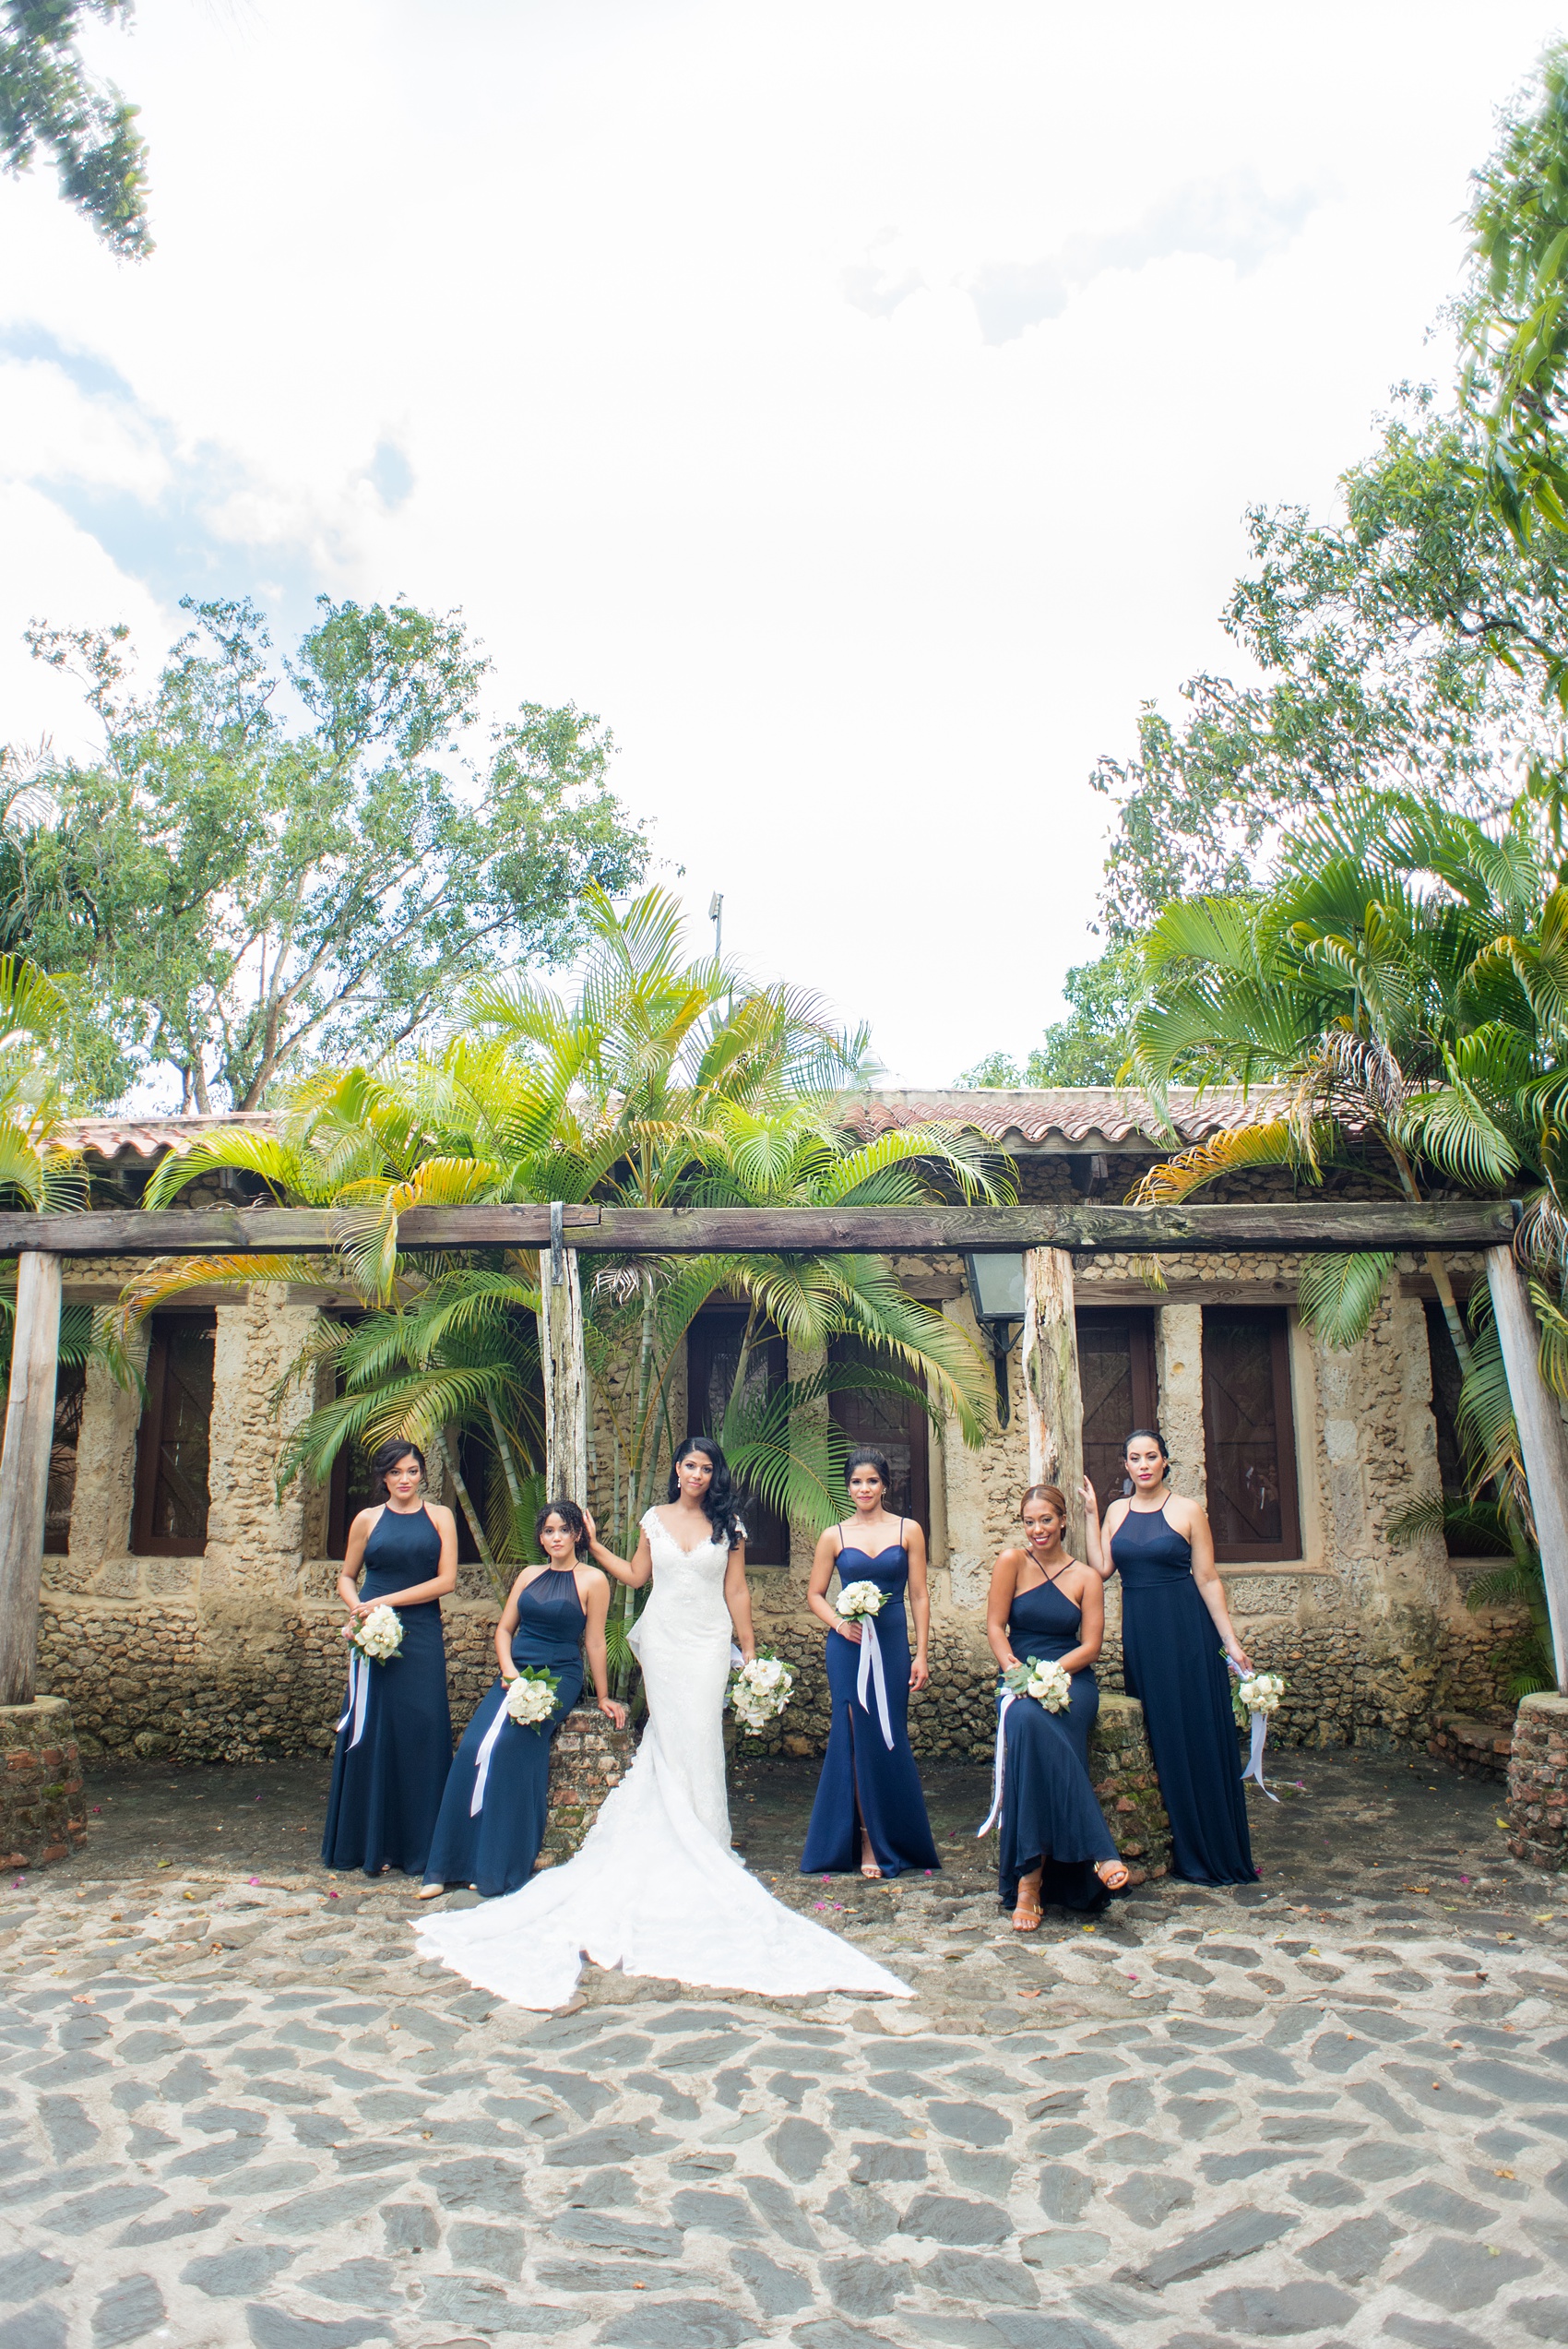 If you’re planning a destination wedding Casa de Campo in the Dominican Republic is a great location. It’s in La Romana, an hour from Punta Cana, and is an all inclusive resort with tropical Minitas beach and mountains view. It’s a beautiful venue, which these pictures by Mikkel Paige Photography prove. Click through for more bridesmaids, groomsmen and wedding party ideas! Coordination by @theeventeur, makeup by NYC Beauty Clique. #mikkelpaige #weddingparty #navybluewedding